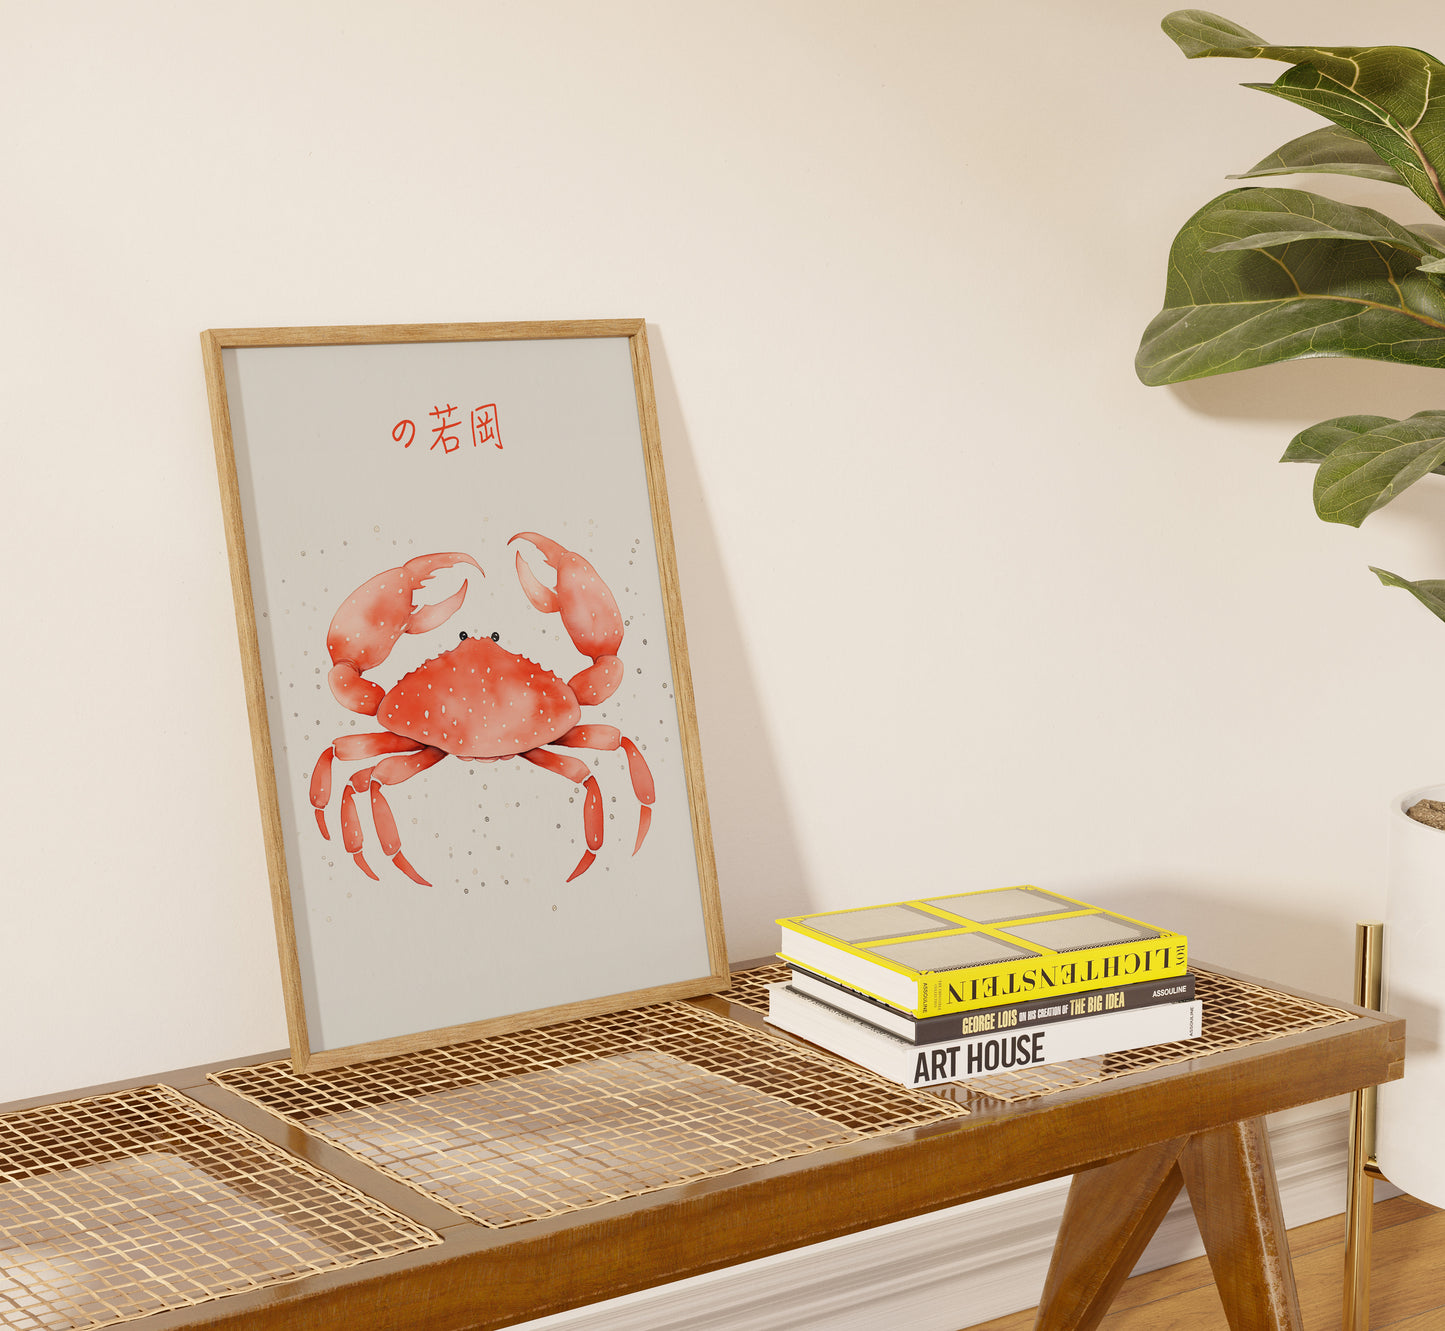 Framed crab illustration on a shelf with books and a plant.